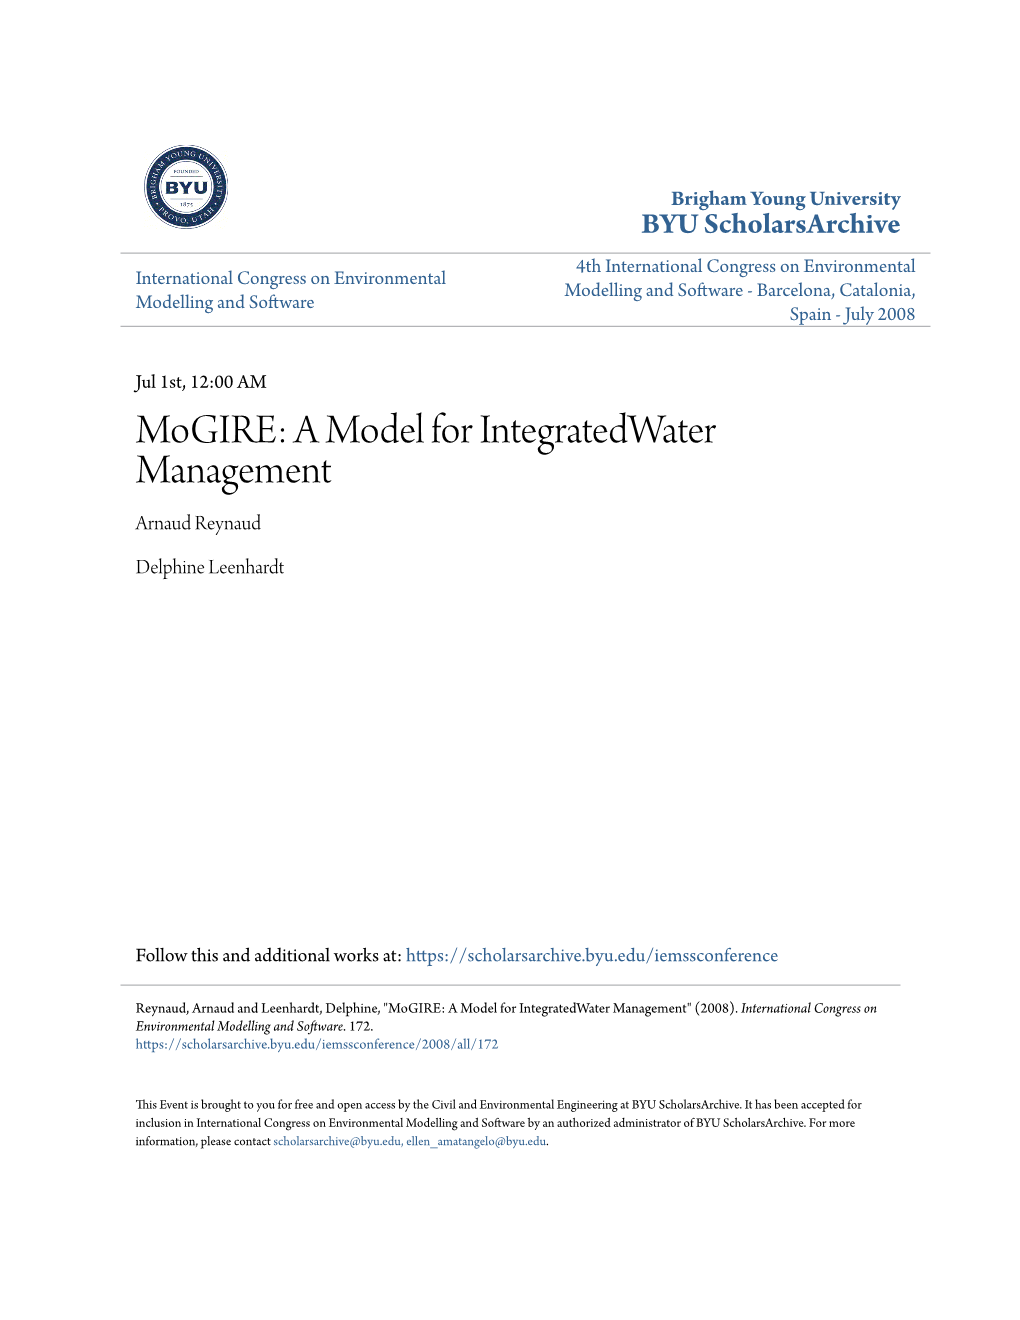 Mogire: a Model for Integratedwater Management Arnaud Reynaud